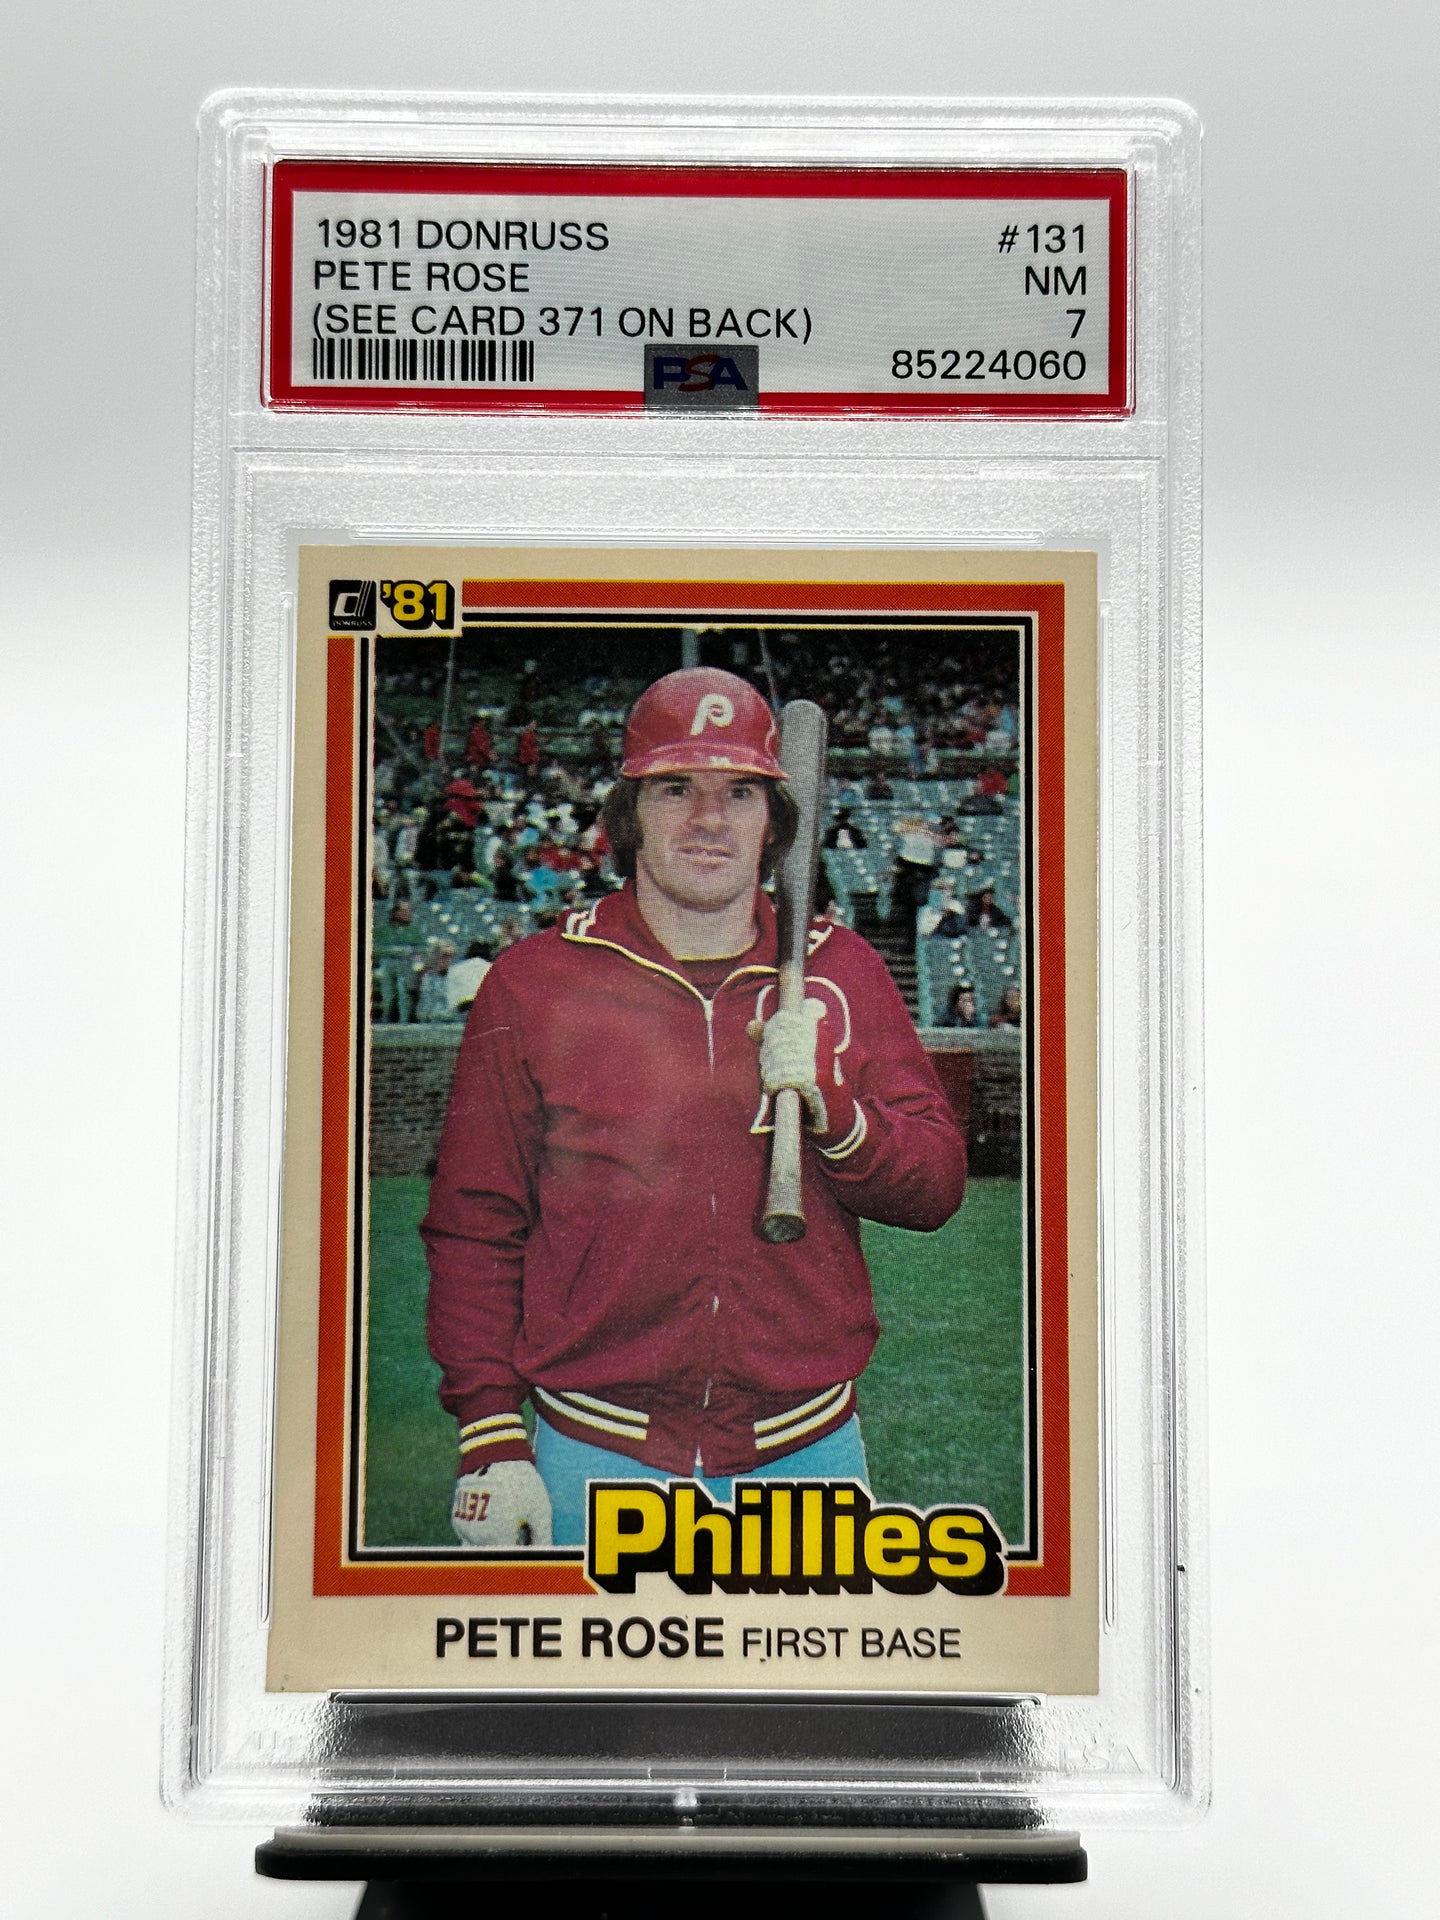 1981 Donruss #131 PETE ROSE variation (see card 371 on back) Phillies PSA 7 NM